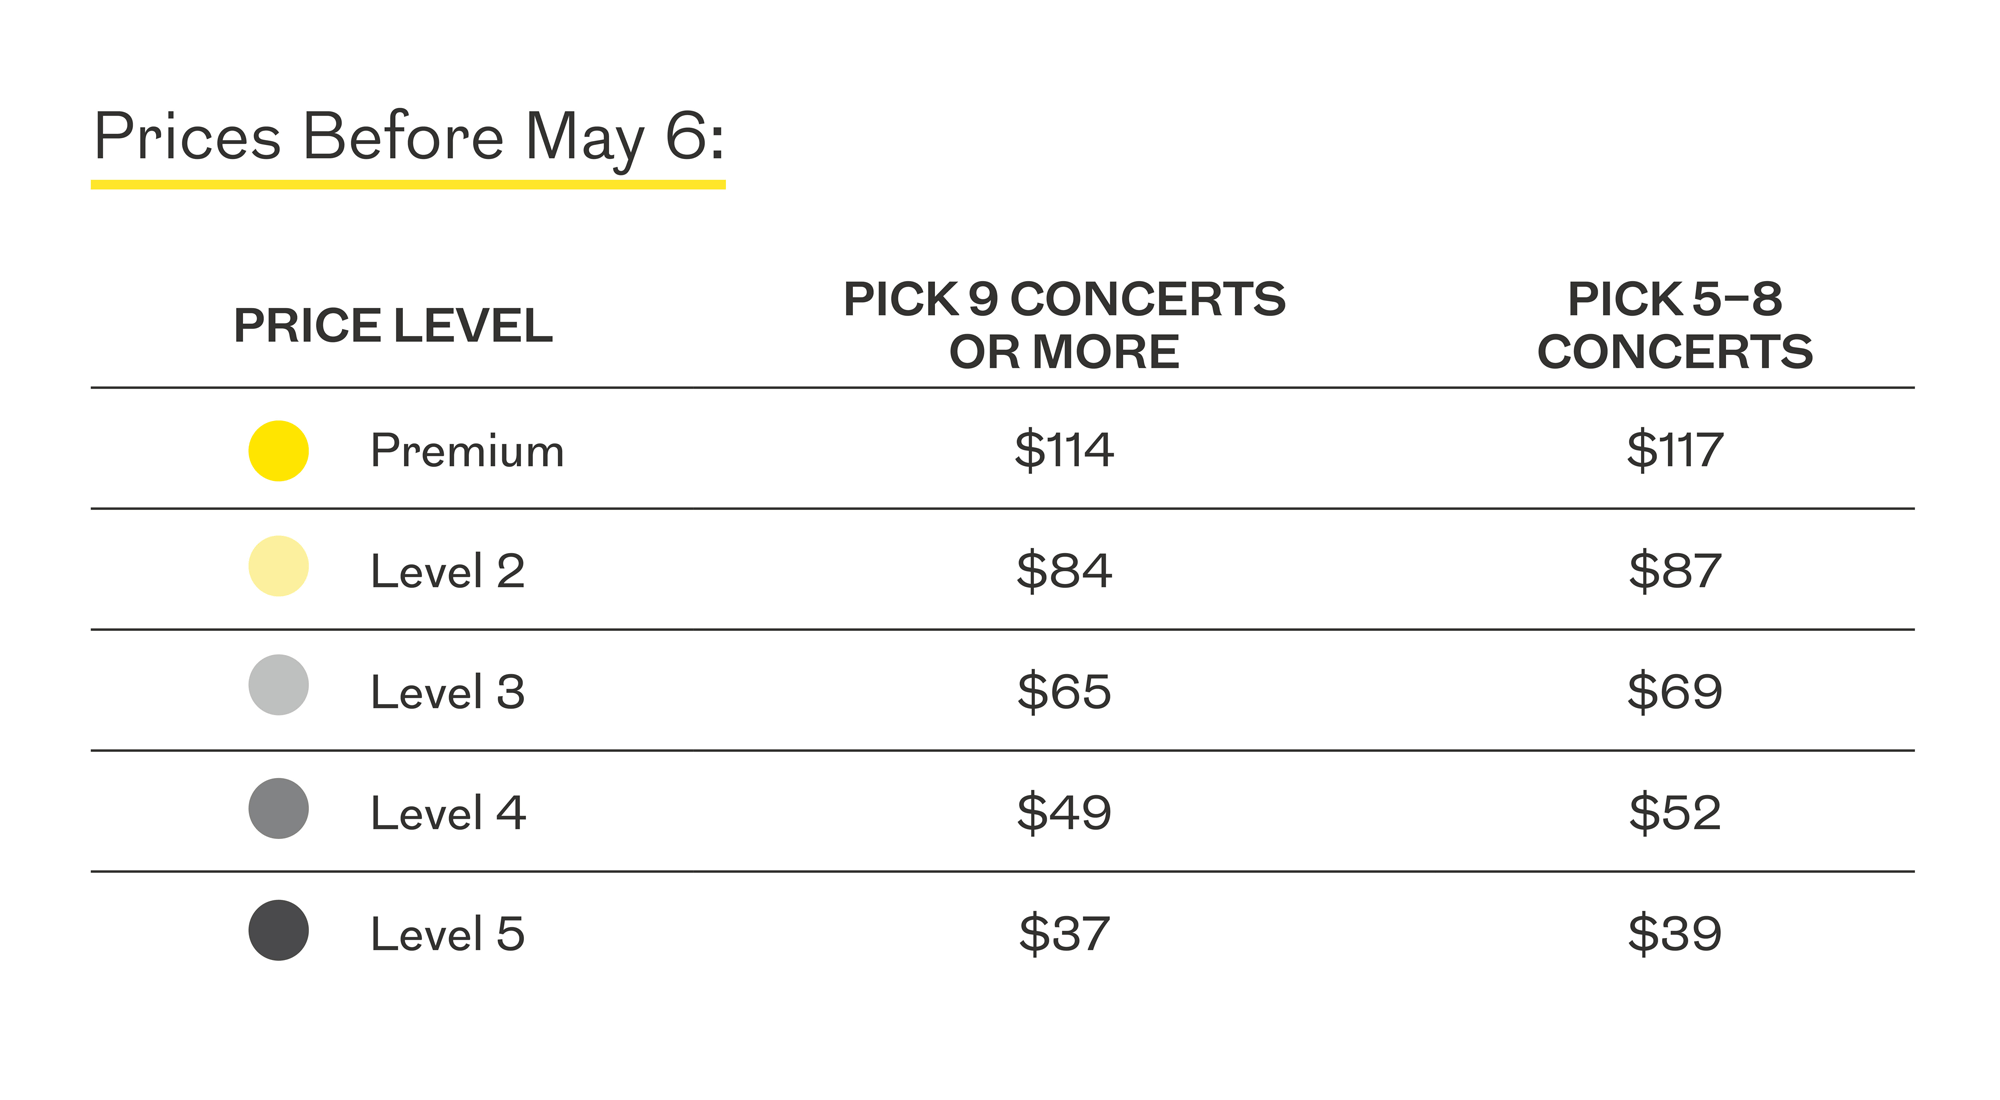 Prices before May 6